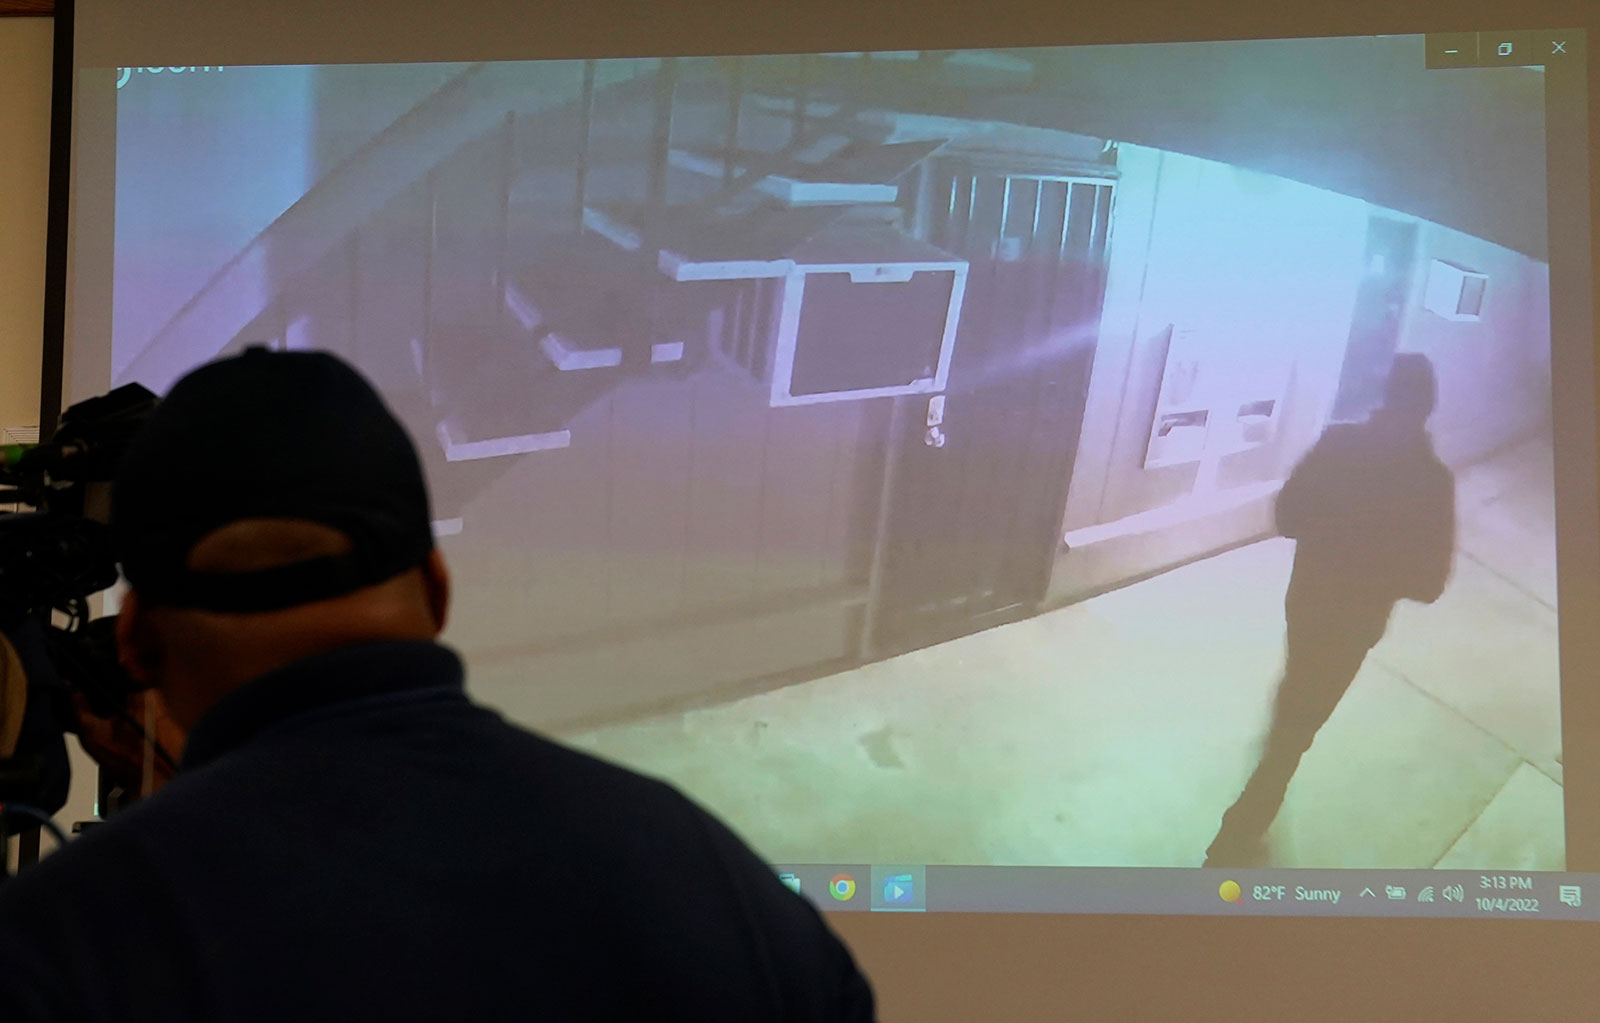 Stockton police show a brief video during a news conference on October 4 from a surveillance camera of what authorities described as a "person of interest" in the investigation into a series of killings.